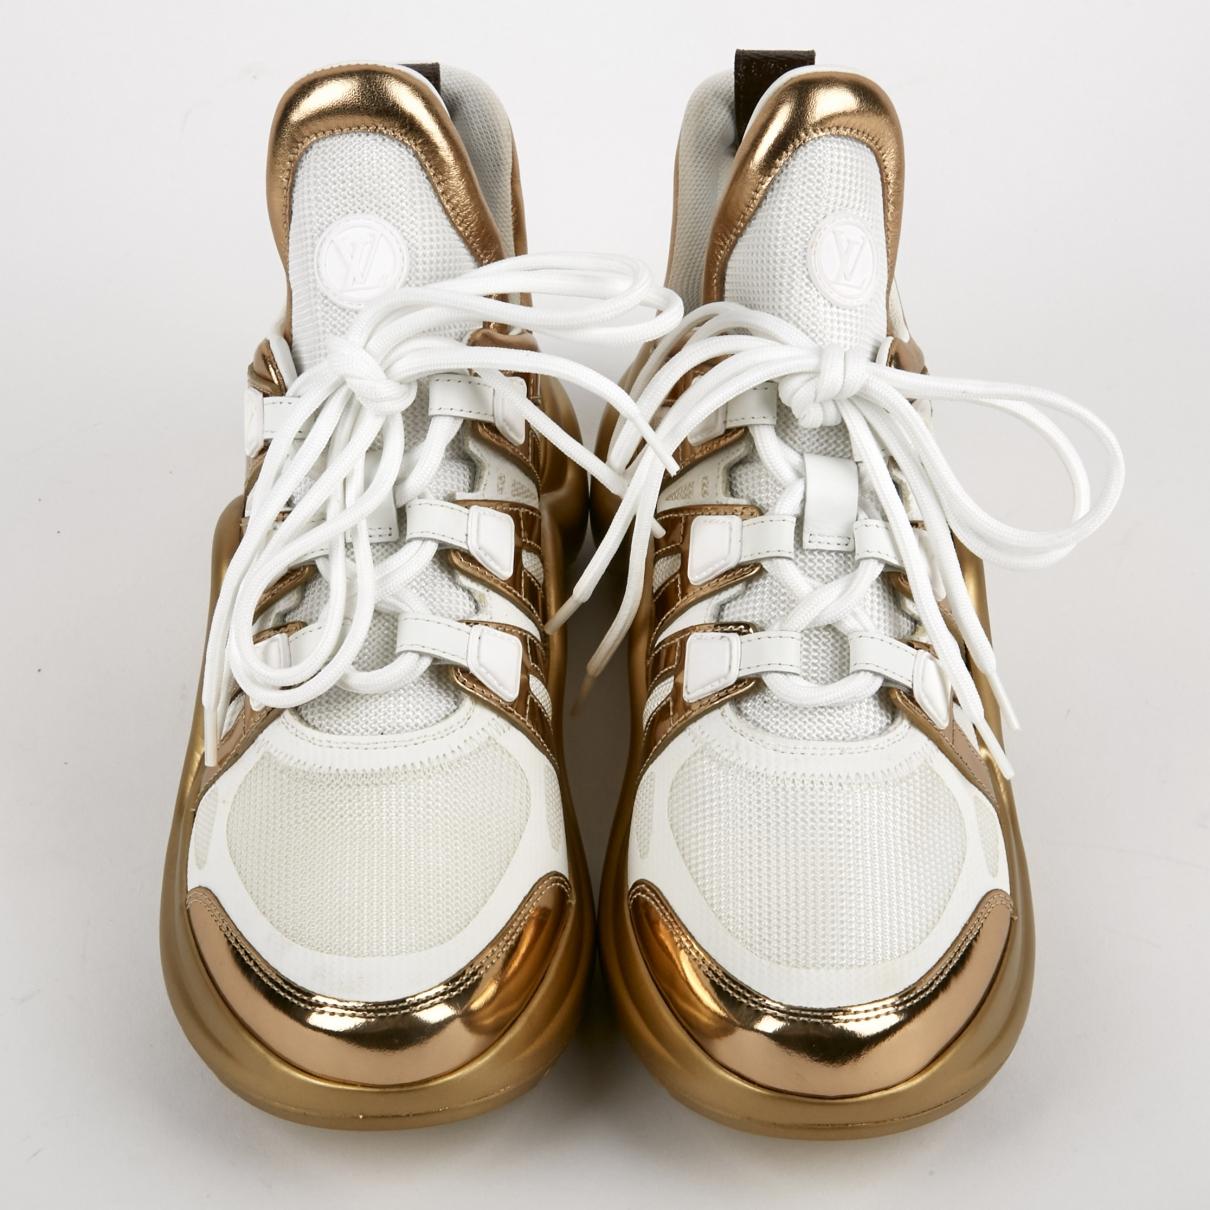 Louis Vuitton Archlight Gold Patent Leather Trainers in Metallic - Lyst